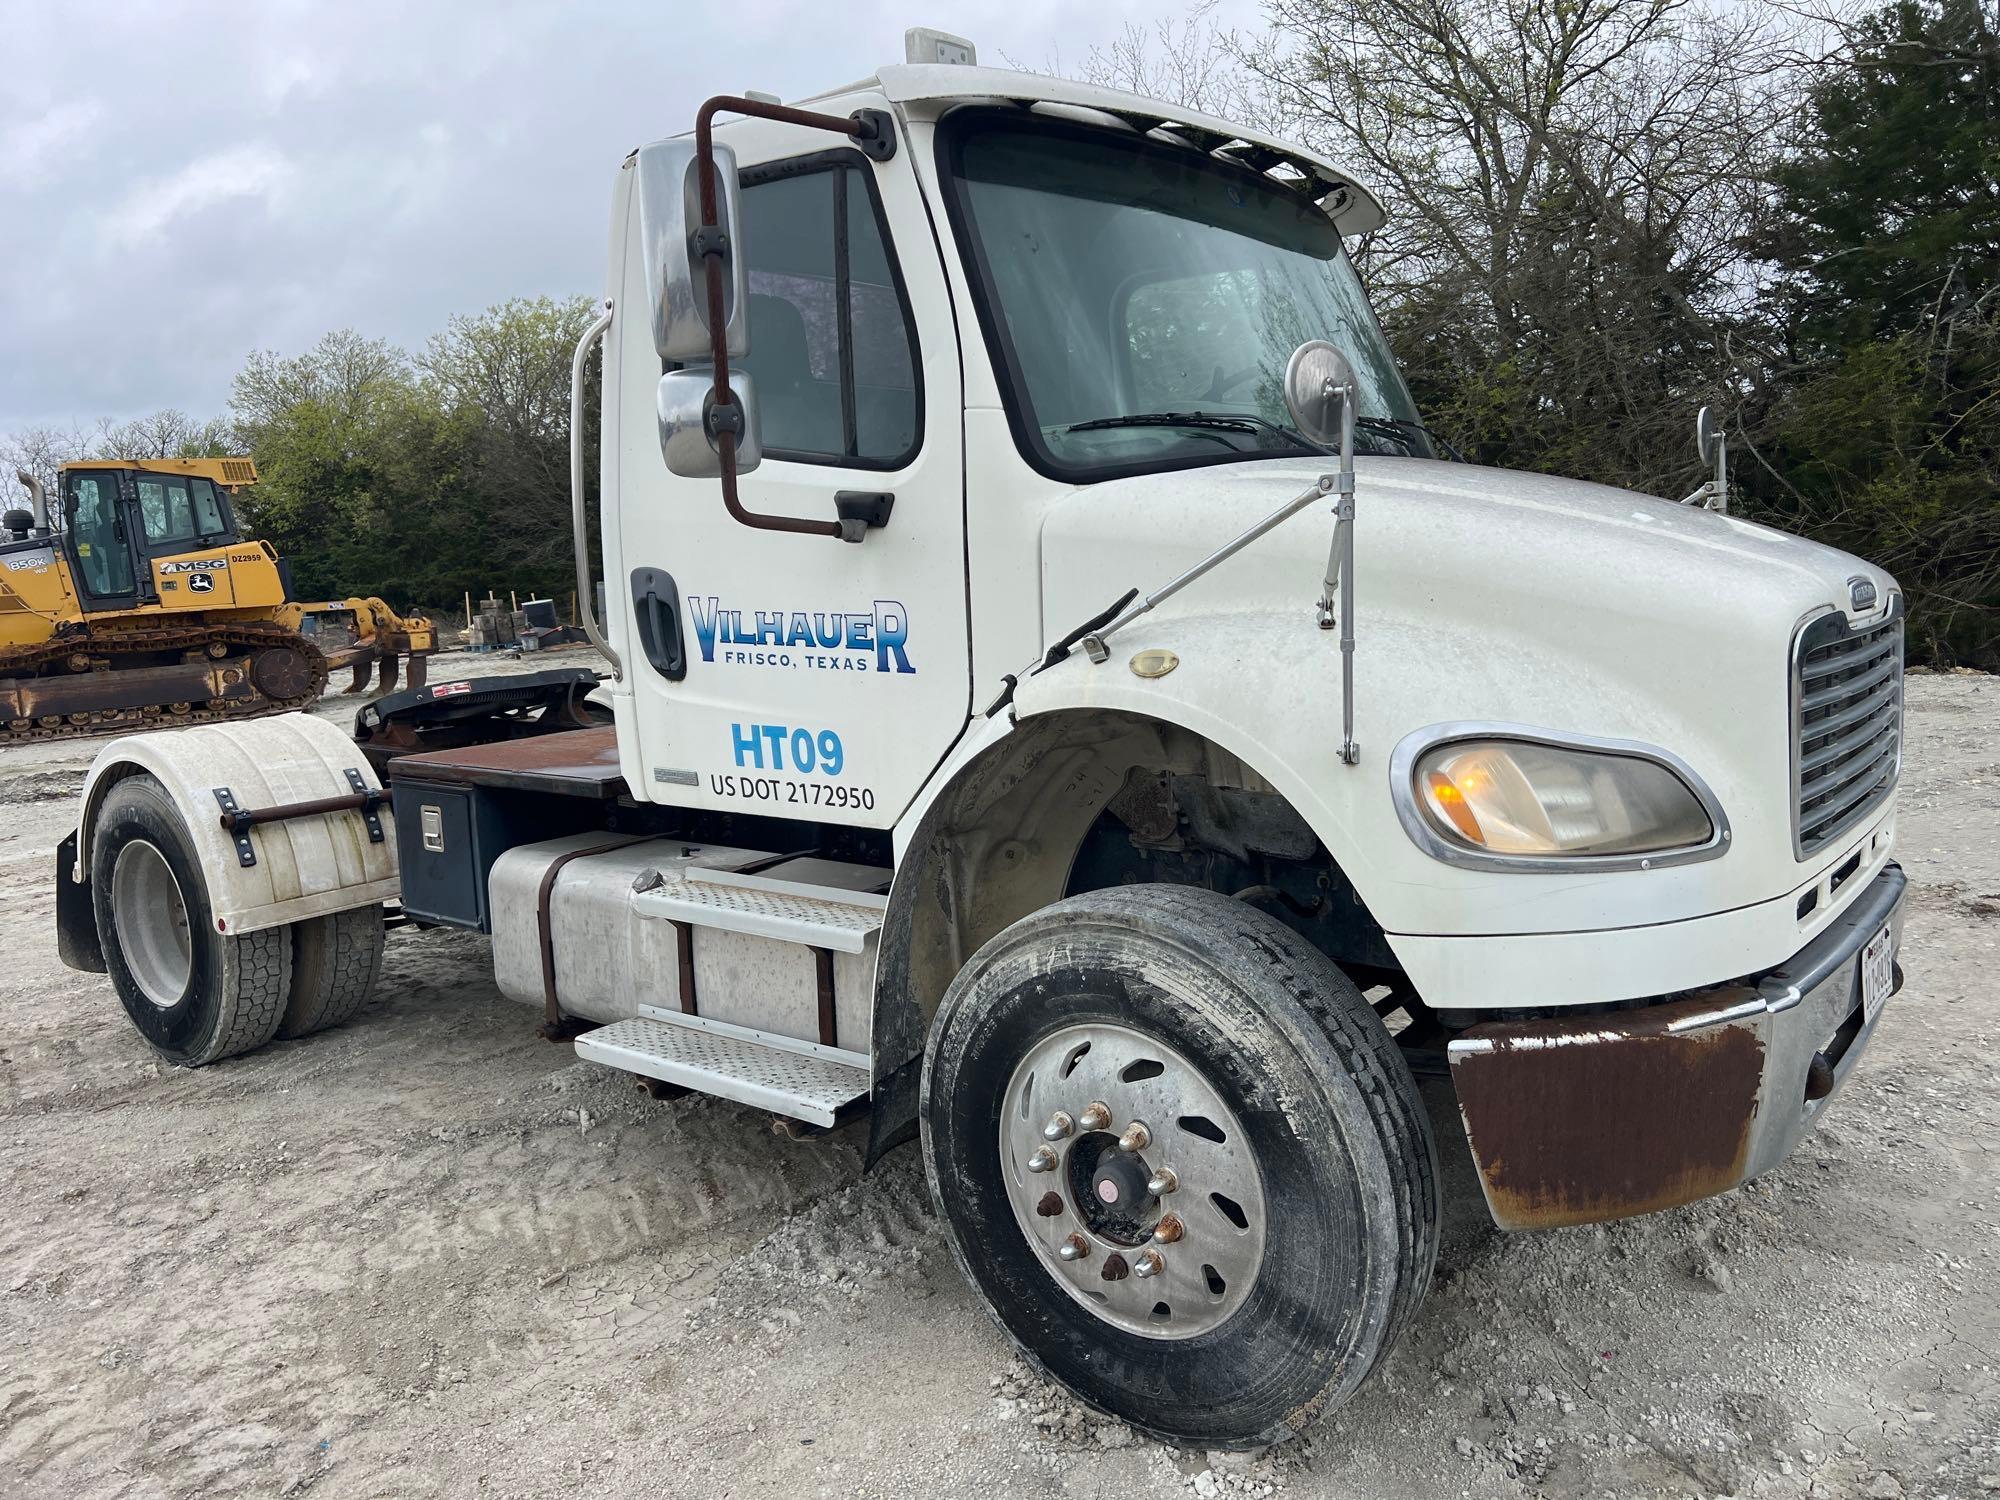 2005 FREIGHTLINER M2 TRUCK TRACTOR VN:1FUBCXDCX5DV00687 powered by diesel engine, equipped with